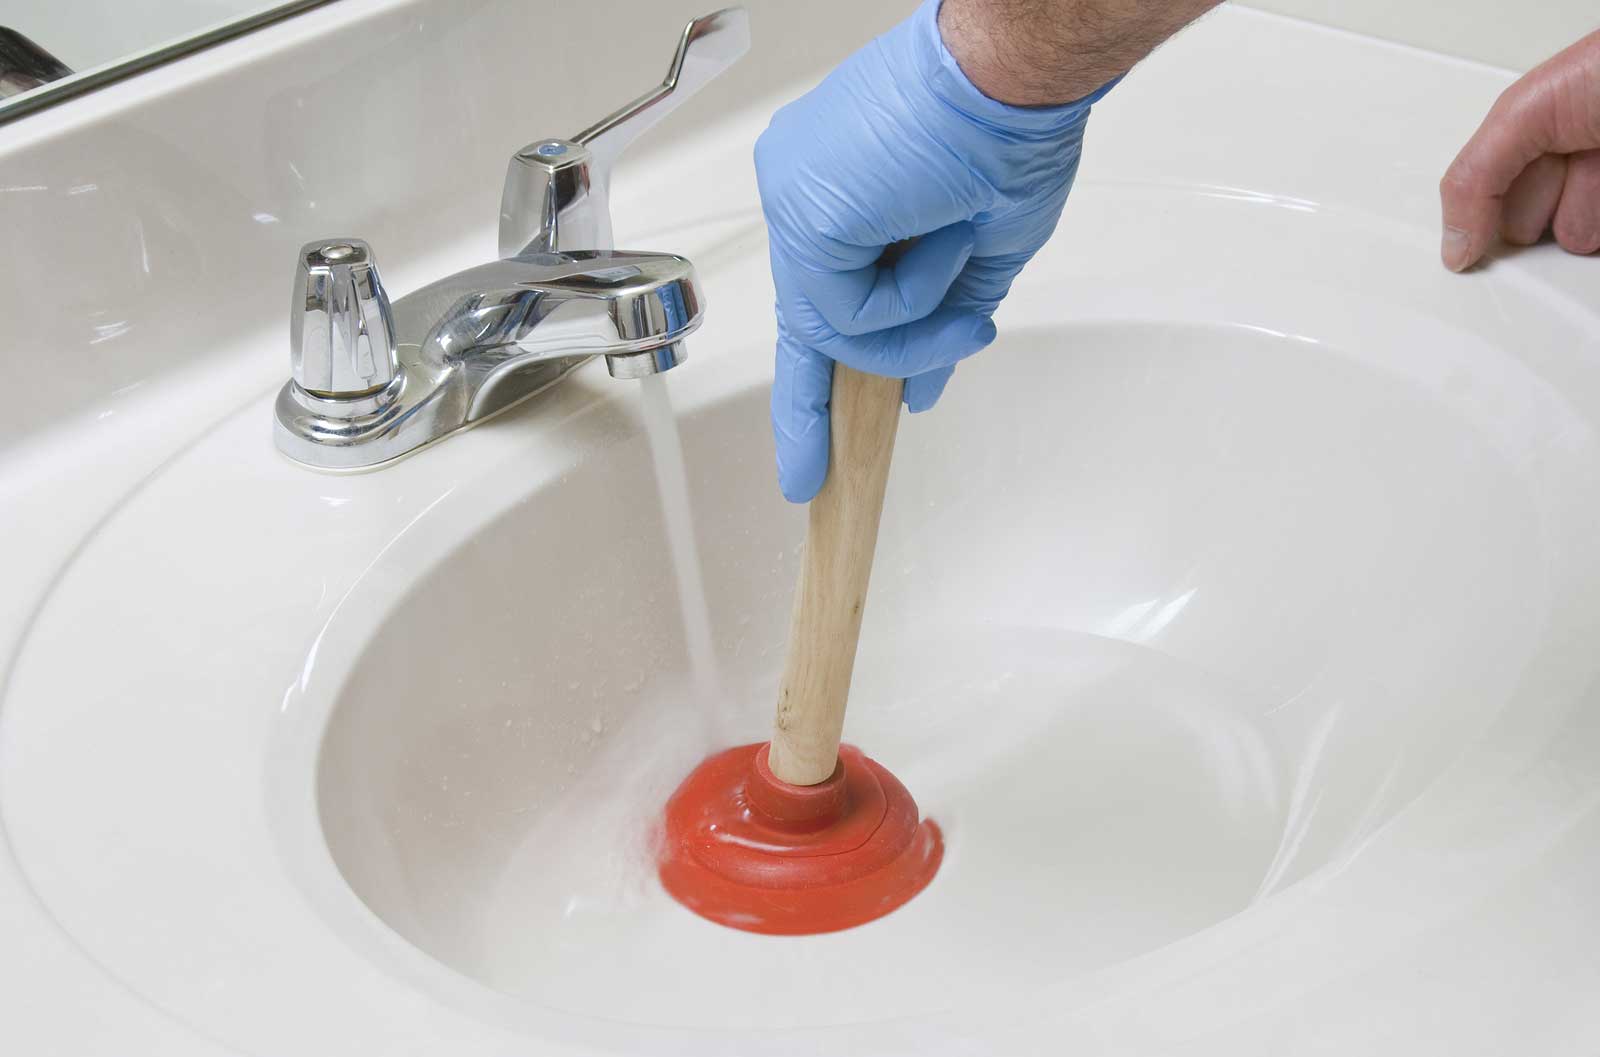 https://www.clearviewplumbing.ca/wp-content/uploads/2023/09/How-To-Unclog-A-Sink-ClearView-Plumbing-Calgary.jpg